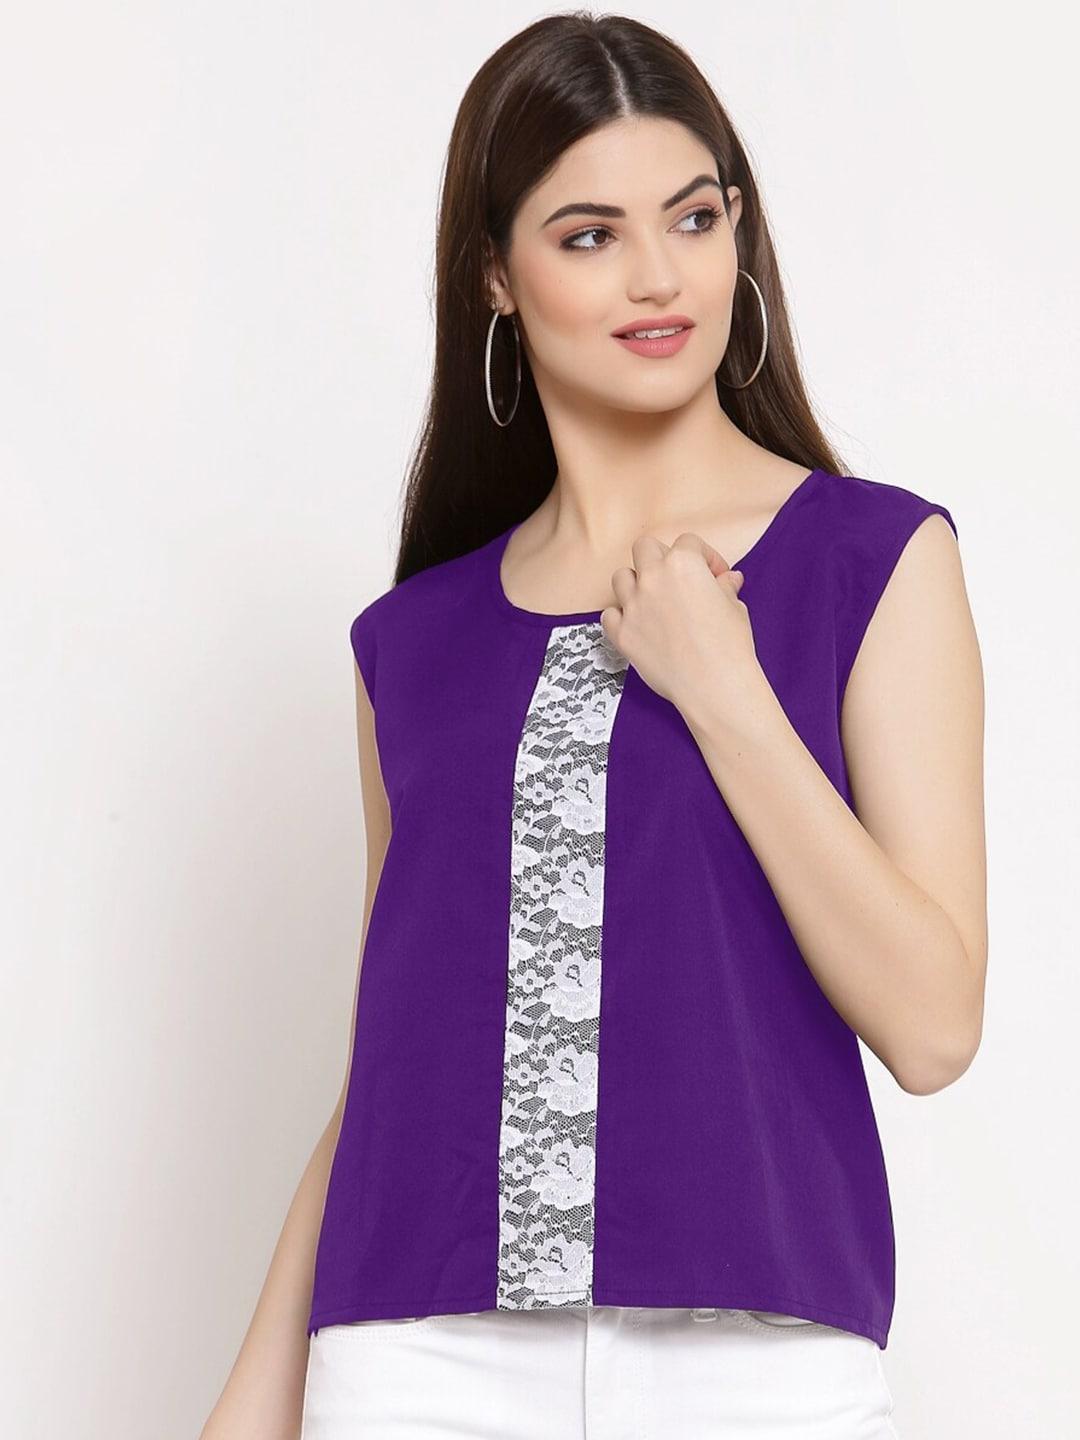 patrorna-women-purple-&-white-solid-lace-detailed-regular-top